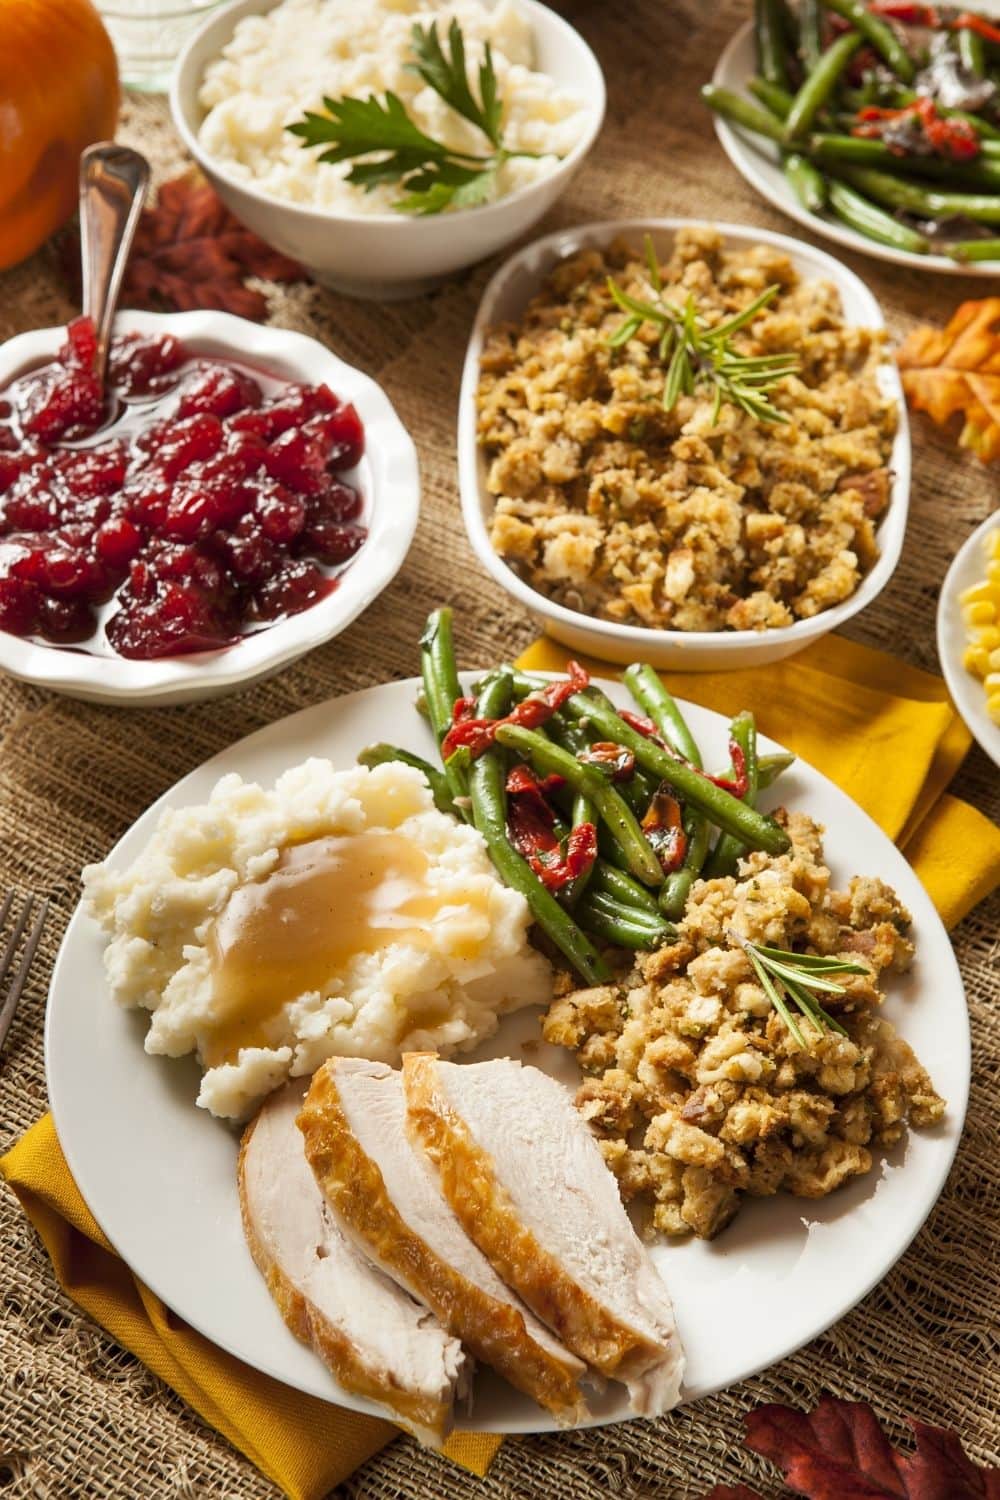 Homemade Thanksgiving Dinner with Stuffing, Turkey, Mashed Potatoes and Cranberry Sauce